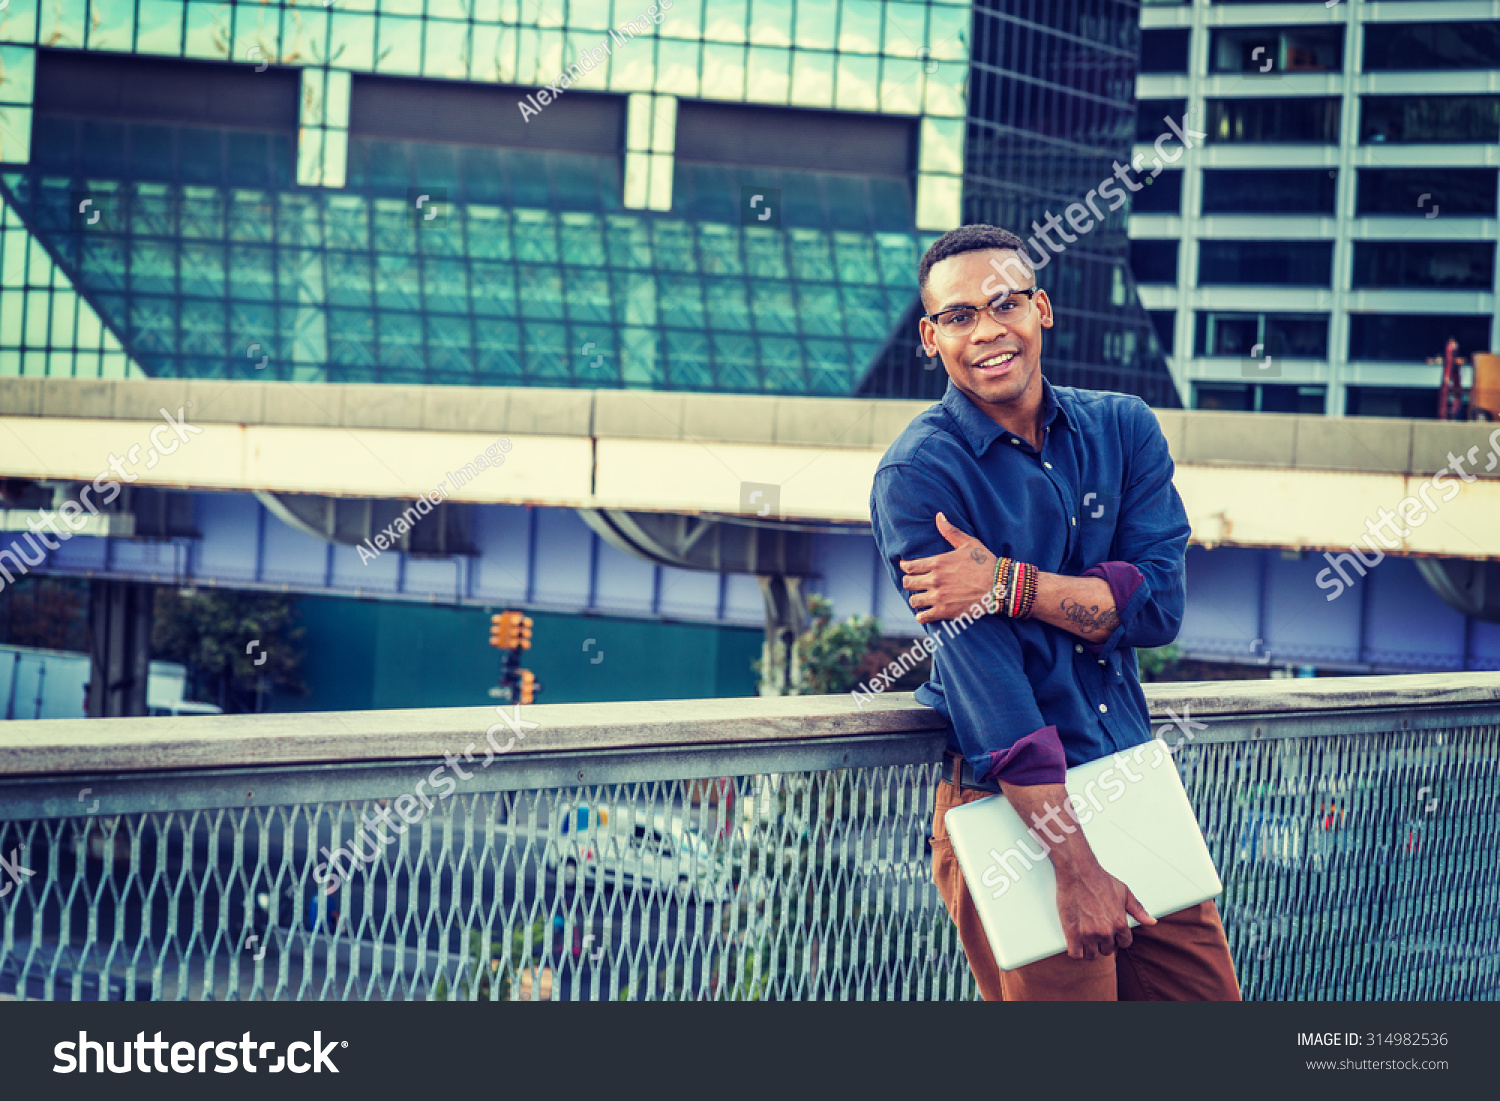 African American college student studying in New York. Wearing blue shirt, glasses, bracelets, holding laptop computer, a young black man standing in business district with high buildings, smiling.  #314982536